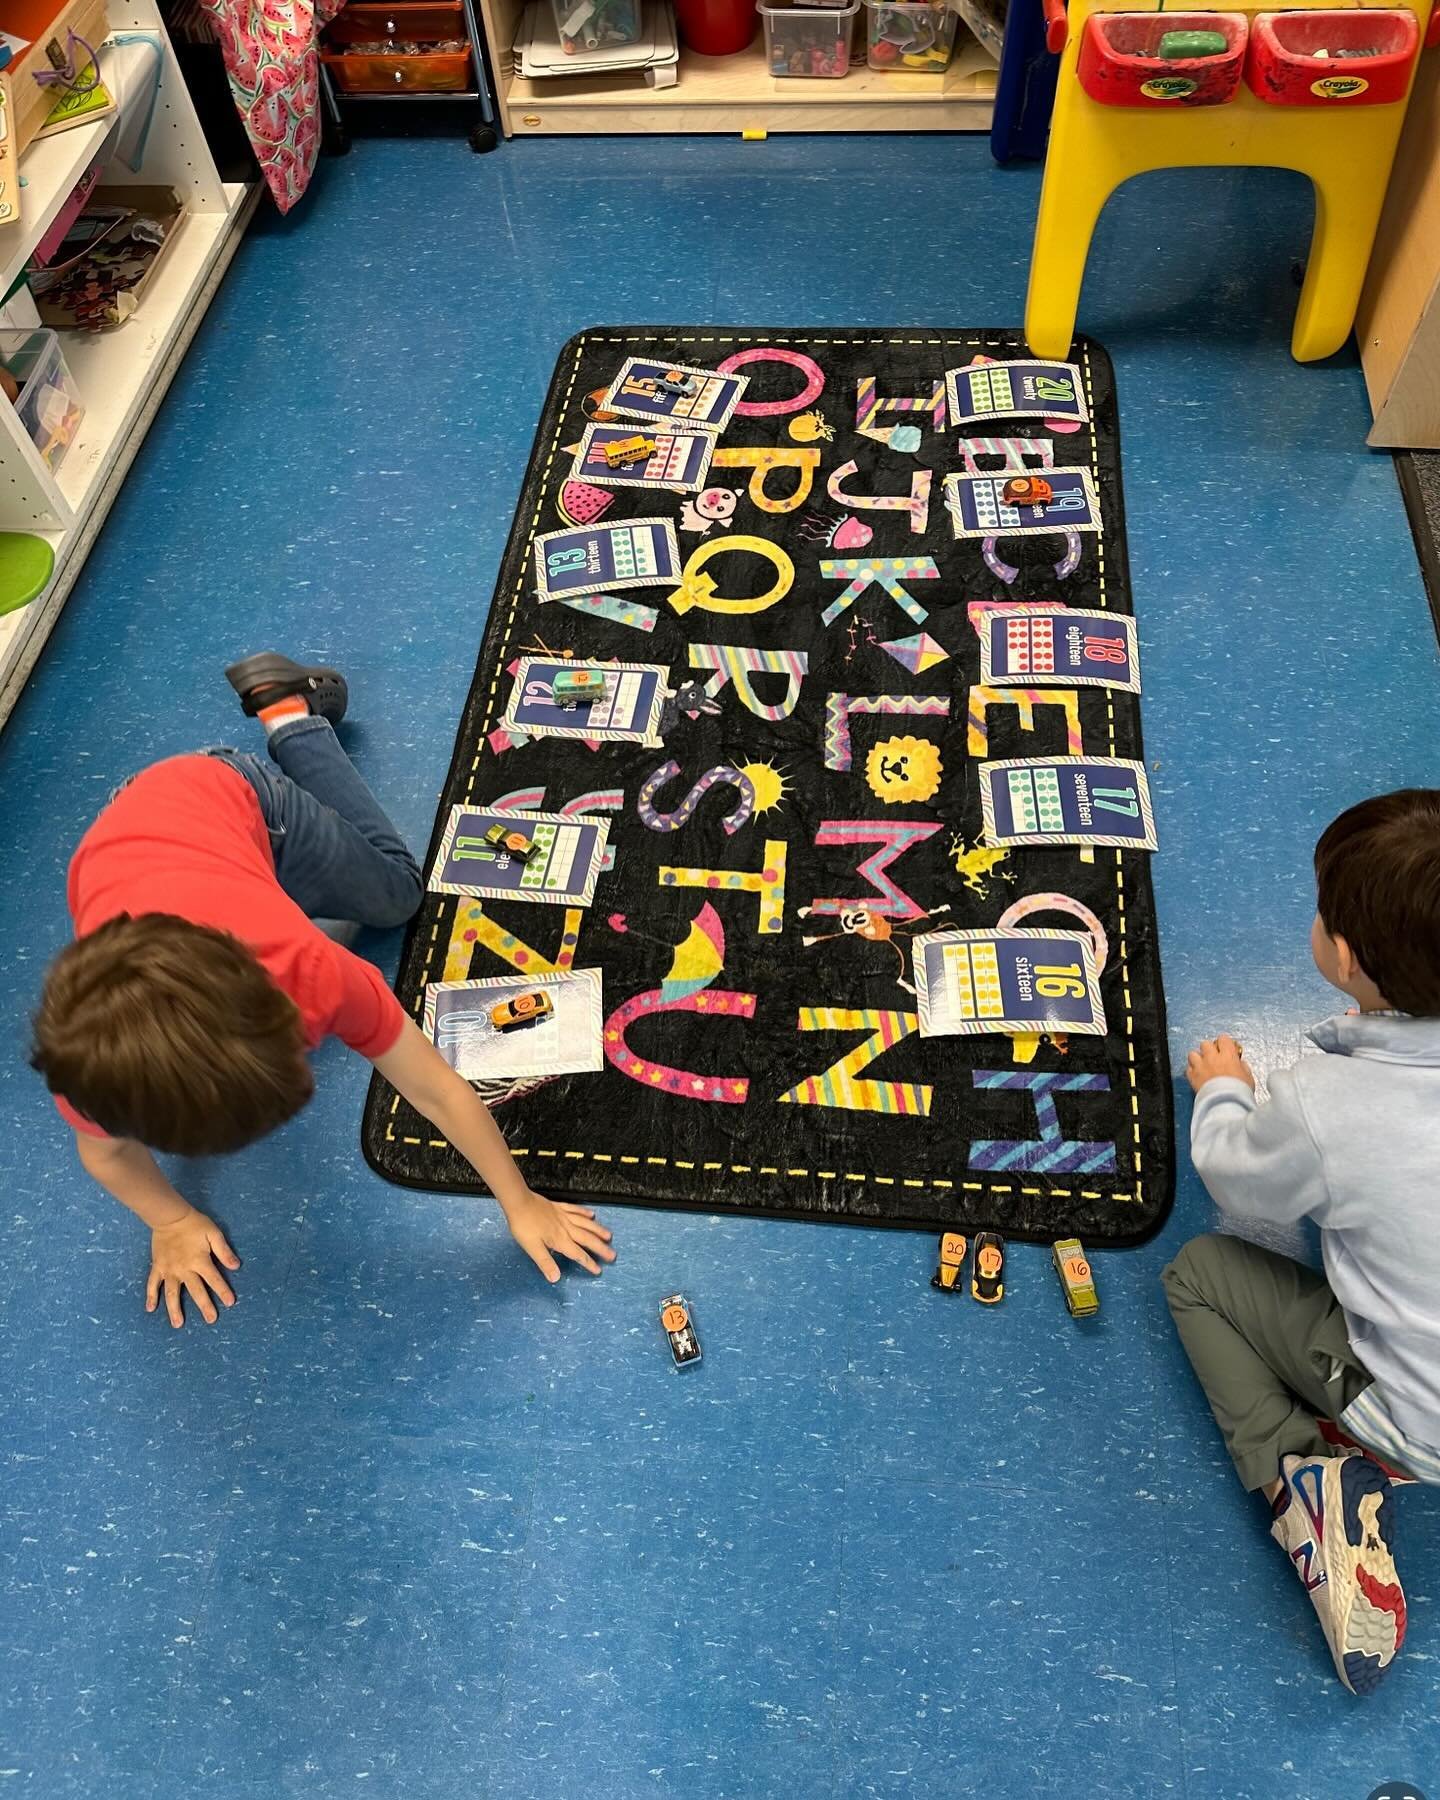 Math in our pre k classroom. Number recognition, number on each car, find their corresponding garages#math#counting#vehicles#onetoone#haupt